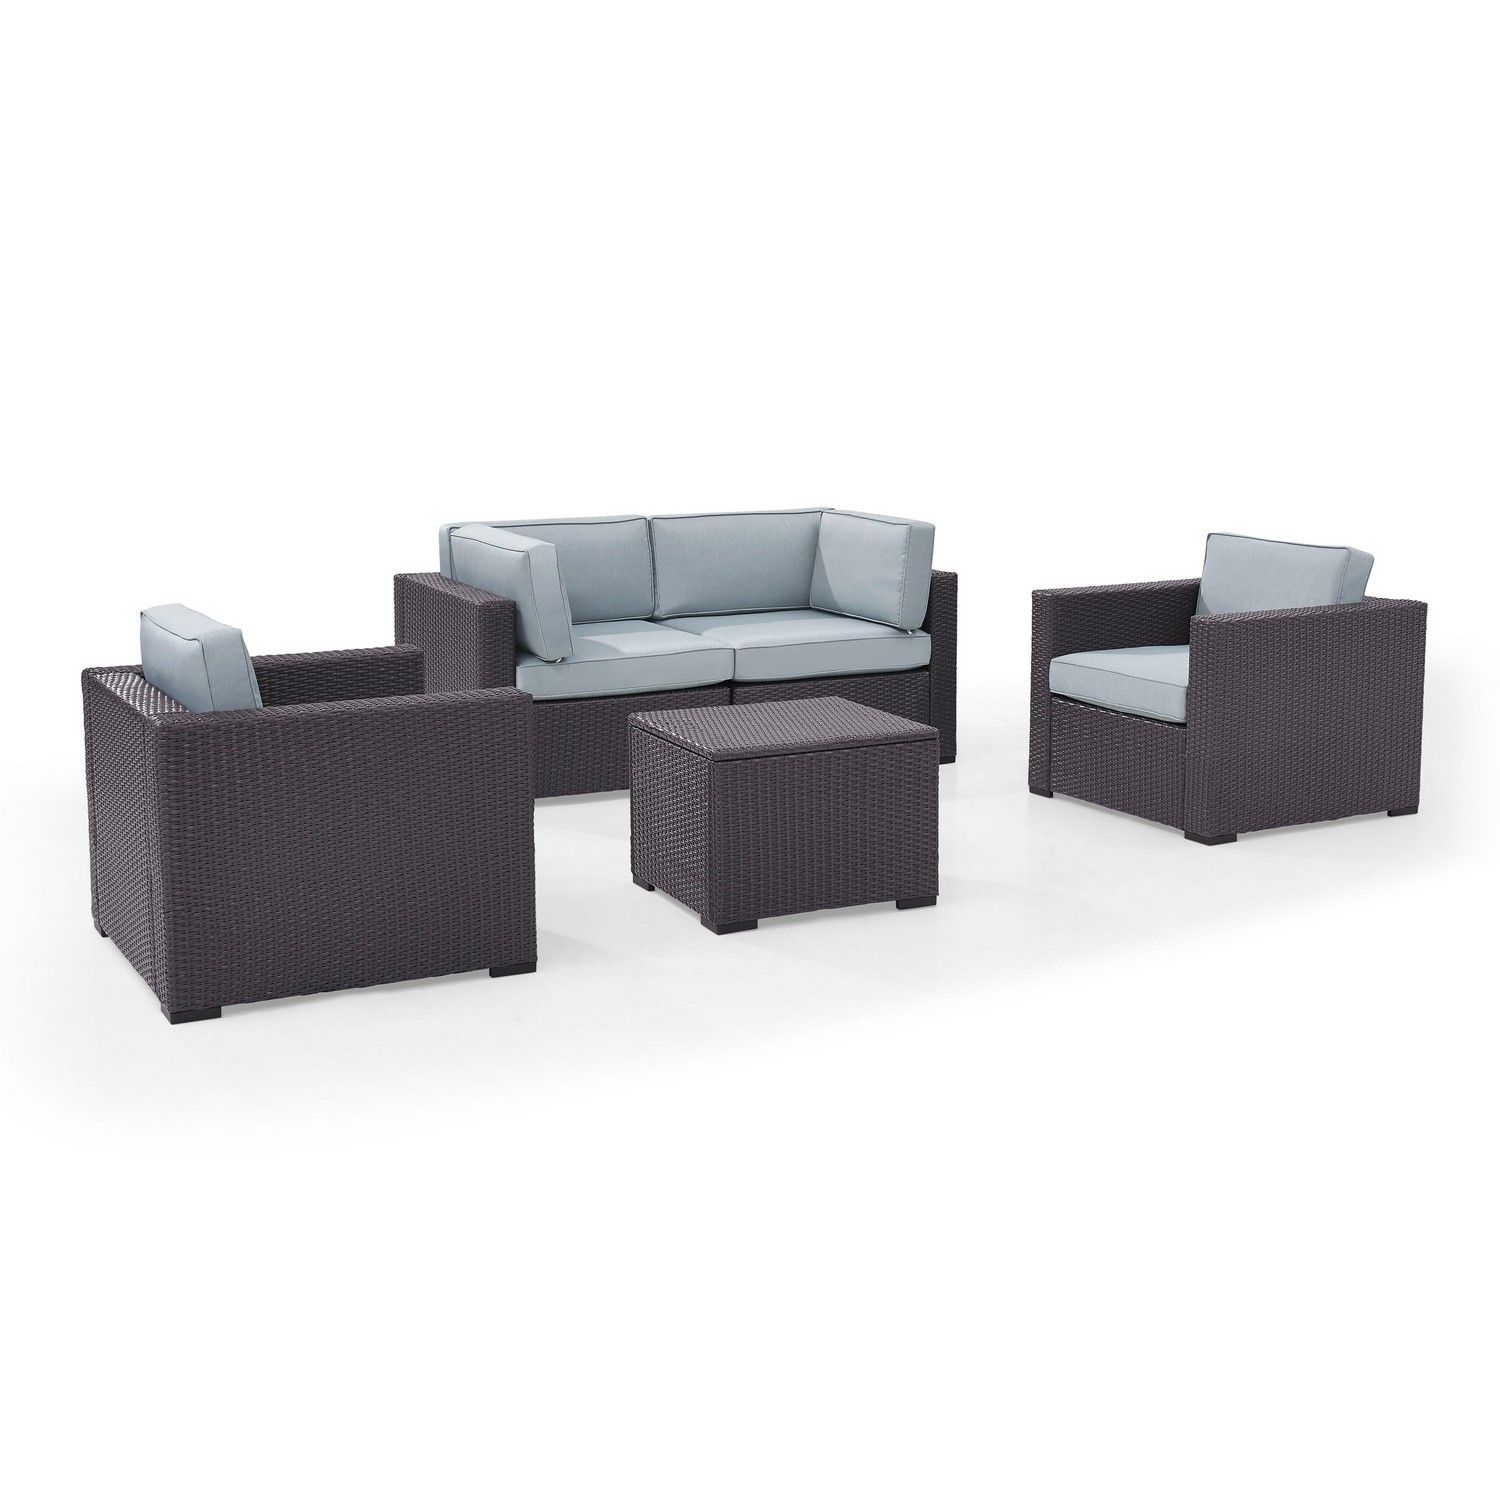 Crosley Biscayne 5-PC Outdoor Wicker Sectional Set - 2 Armchairs, 2 Corner Chair, Coffee Table - Mist/Brown